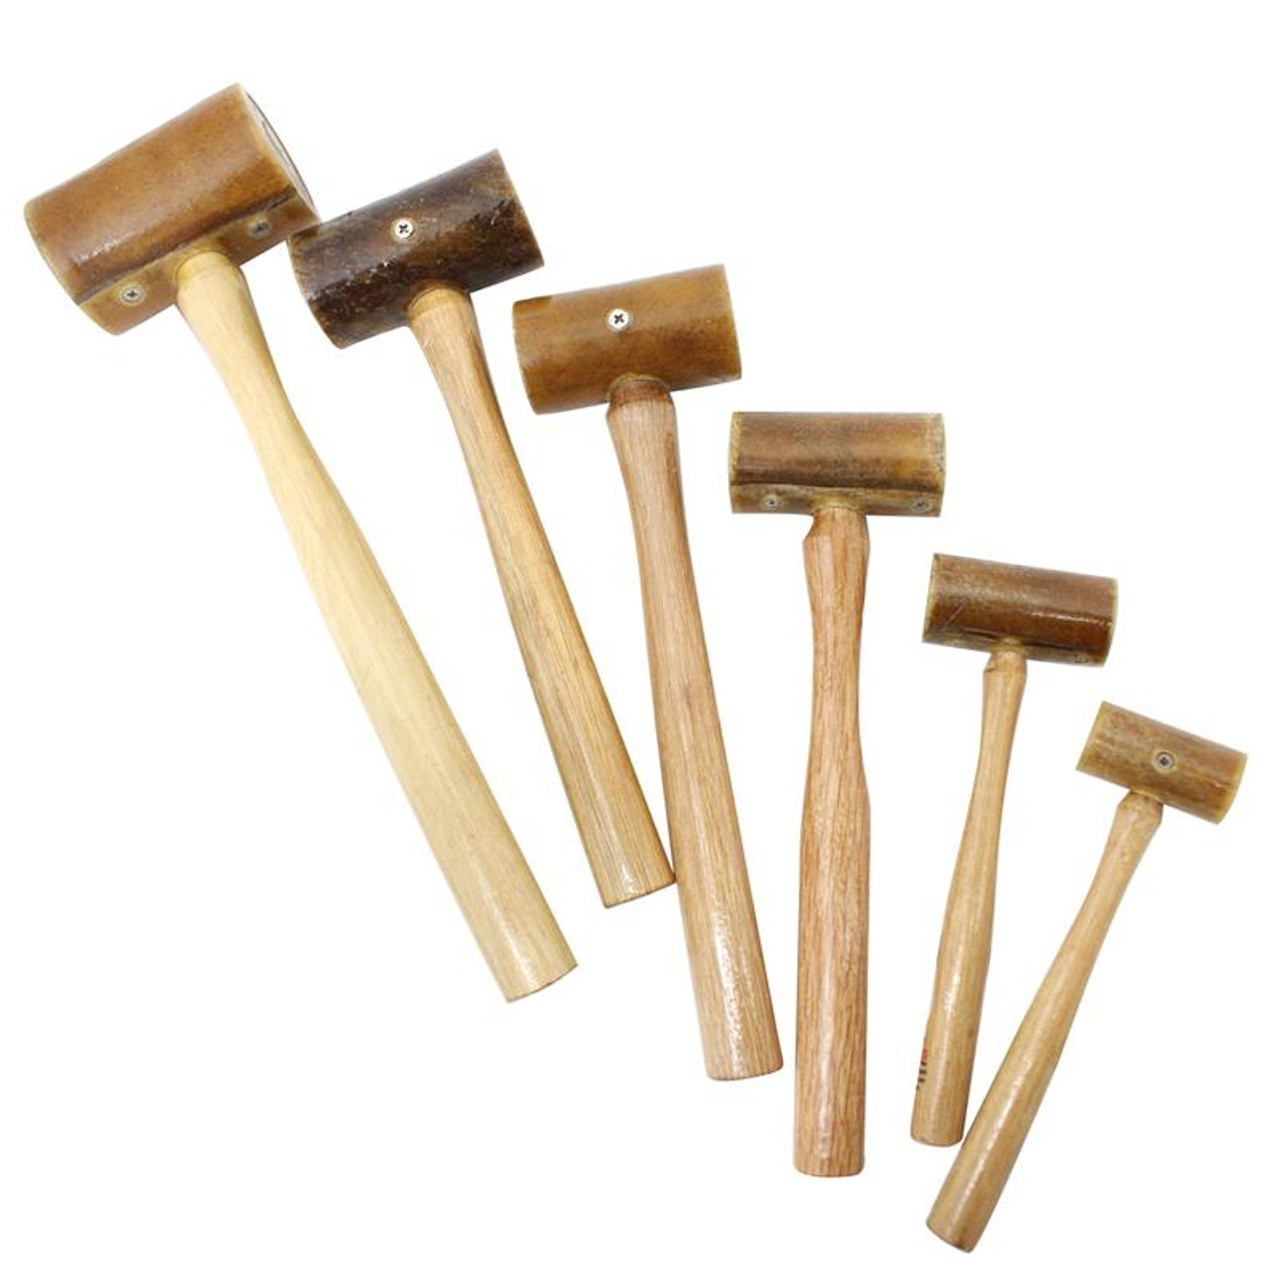 Grobet Rawhide Mallets for Jewelry Repair 1 by 2 Inch